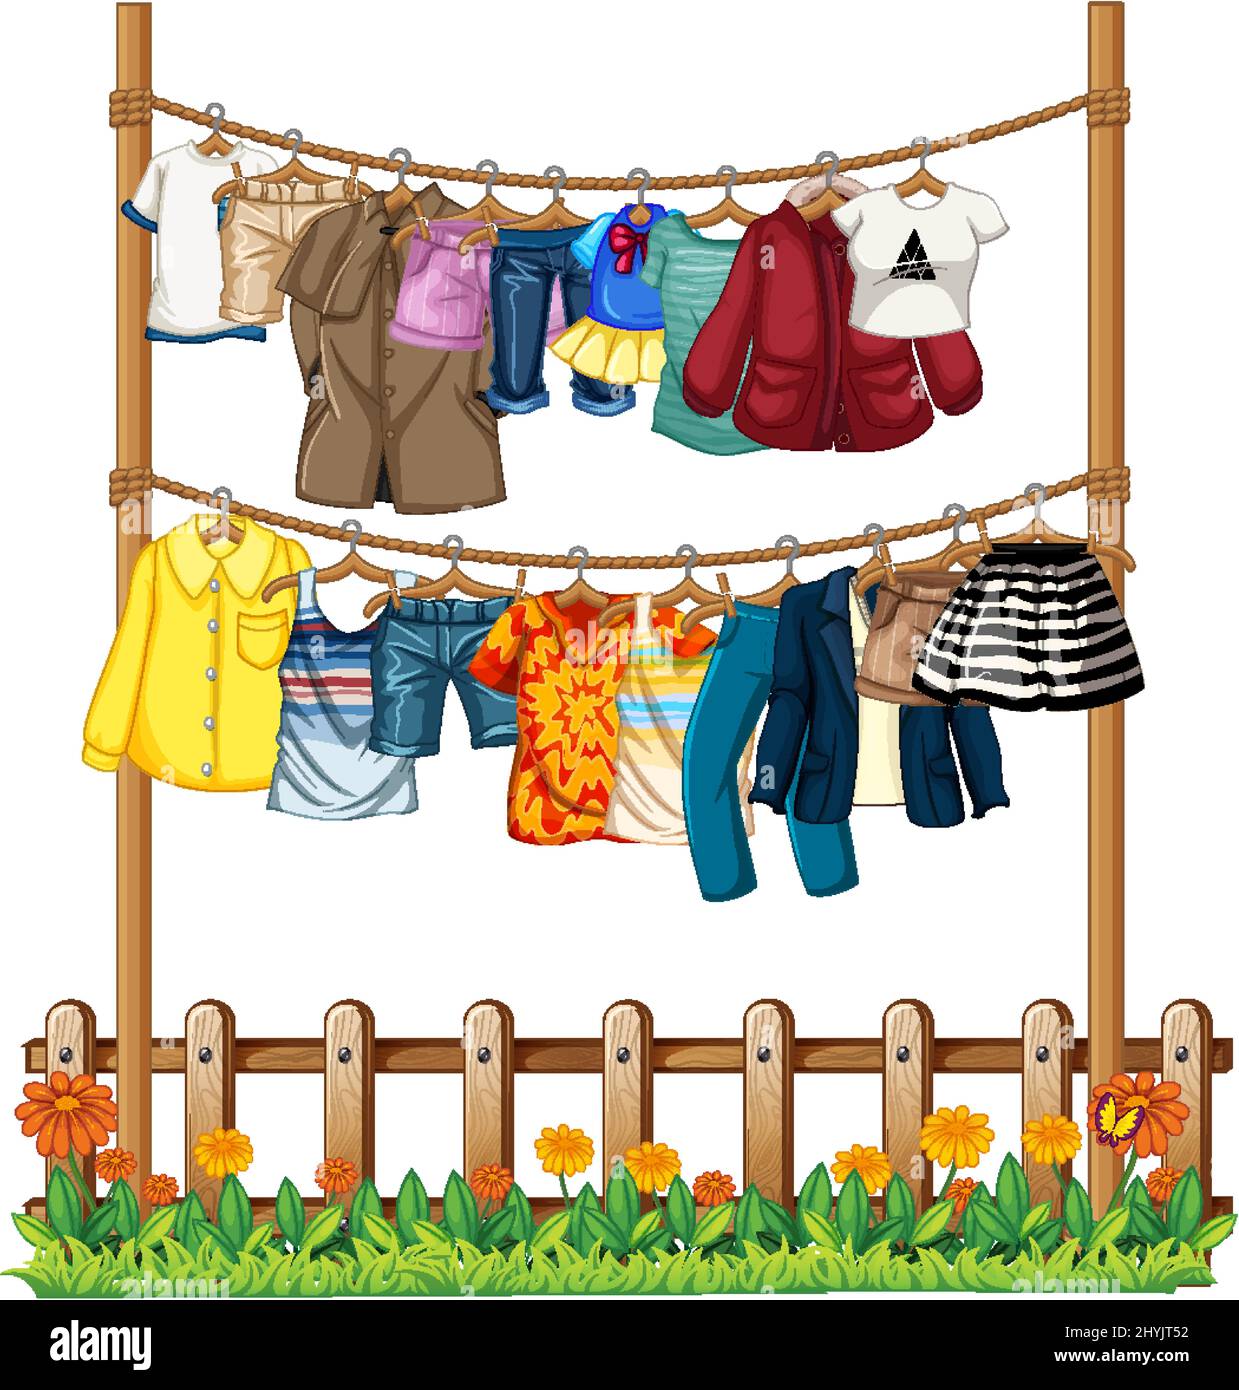 Many clothes hanging on clothesline illustration Stock Vector